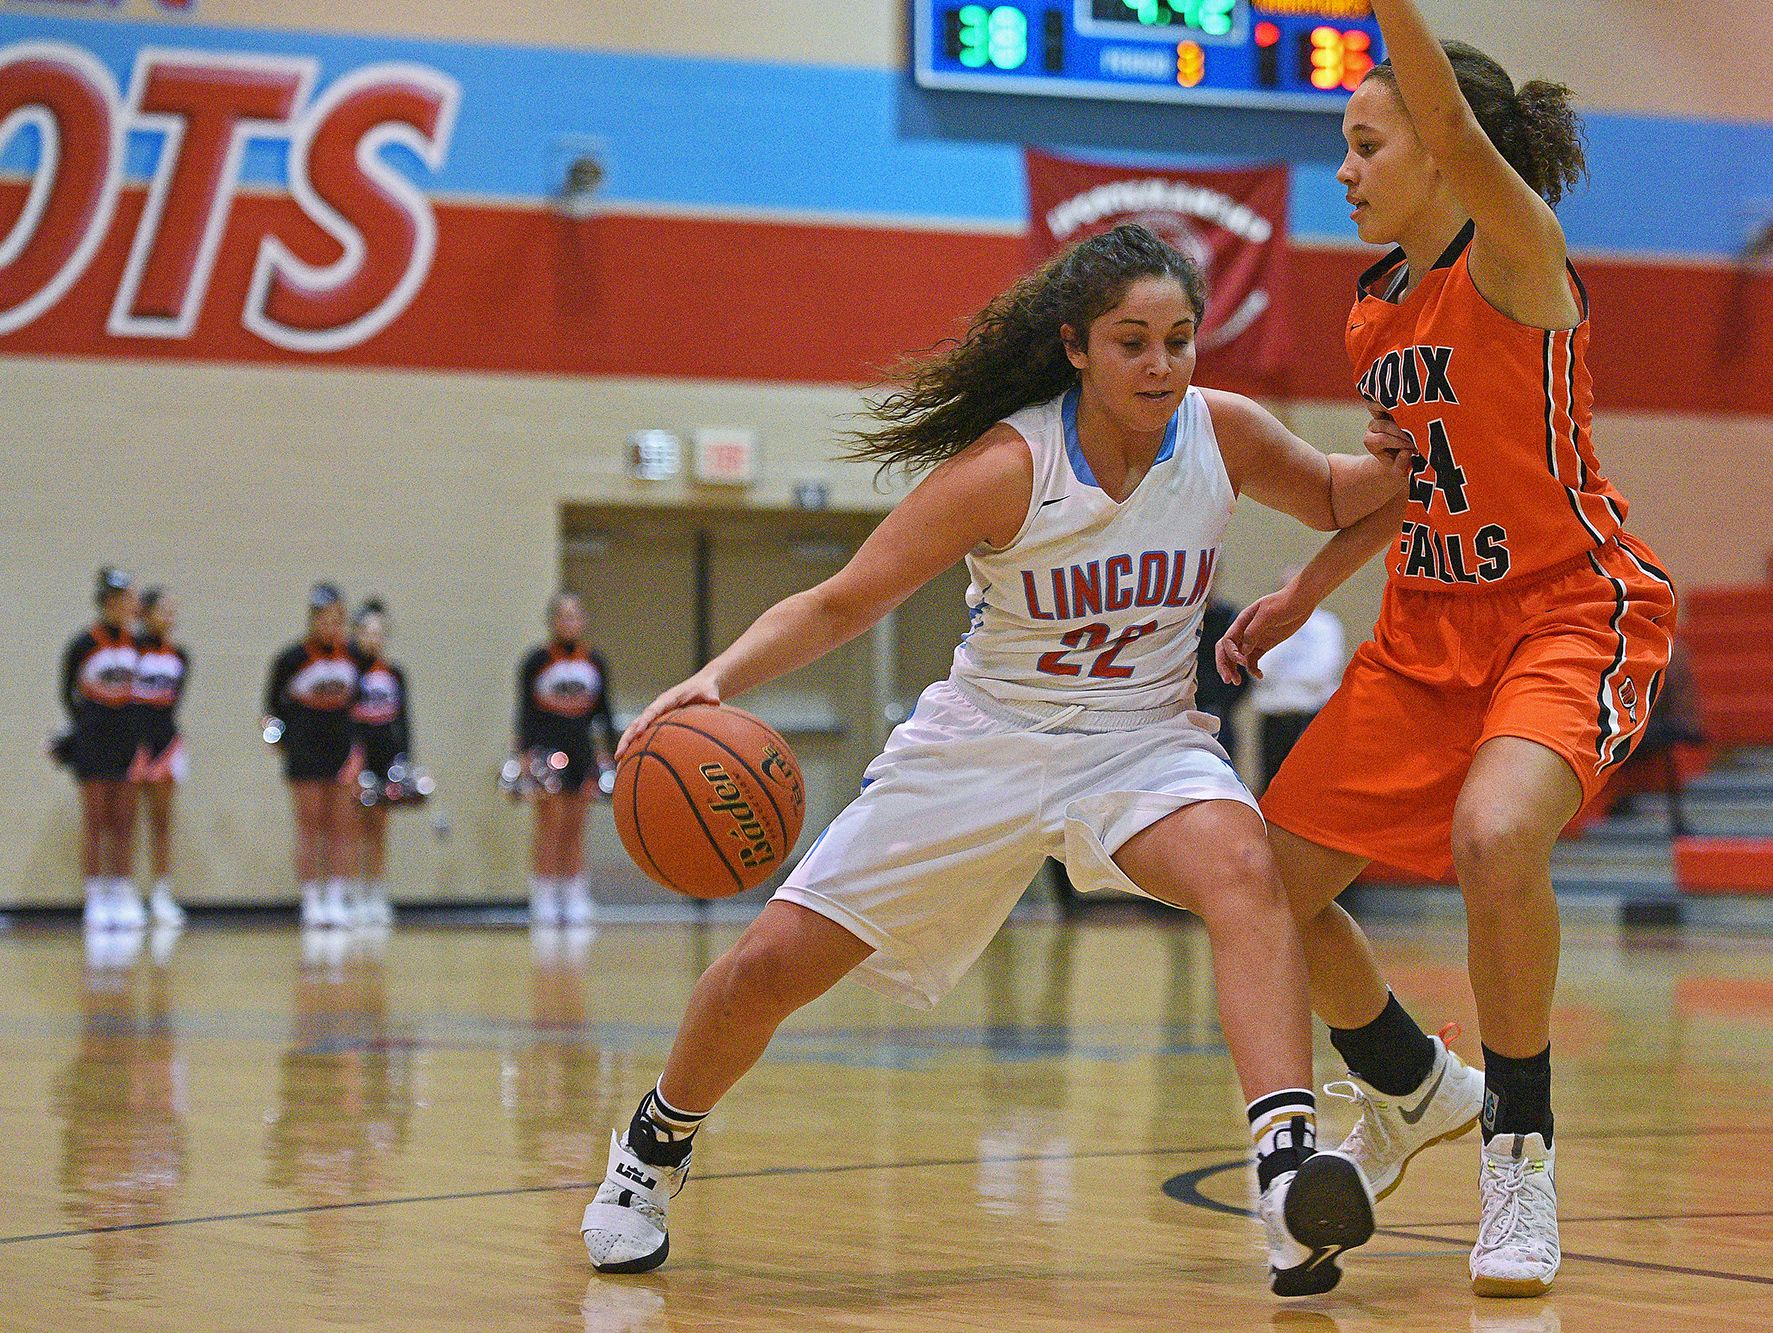 Lincoln's Sydney Rosinsky (22) tries to get by Washington's Jada Cunningham (24) during a game Tuesday, Feb. 7, 2017, at Lincoln High School in Sioux Falls.